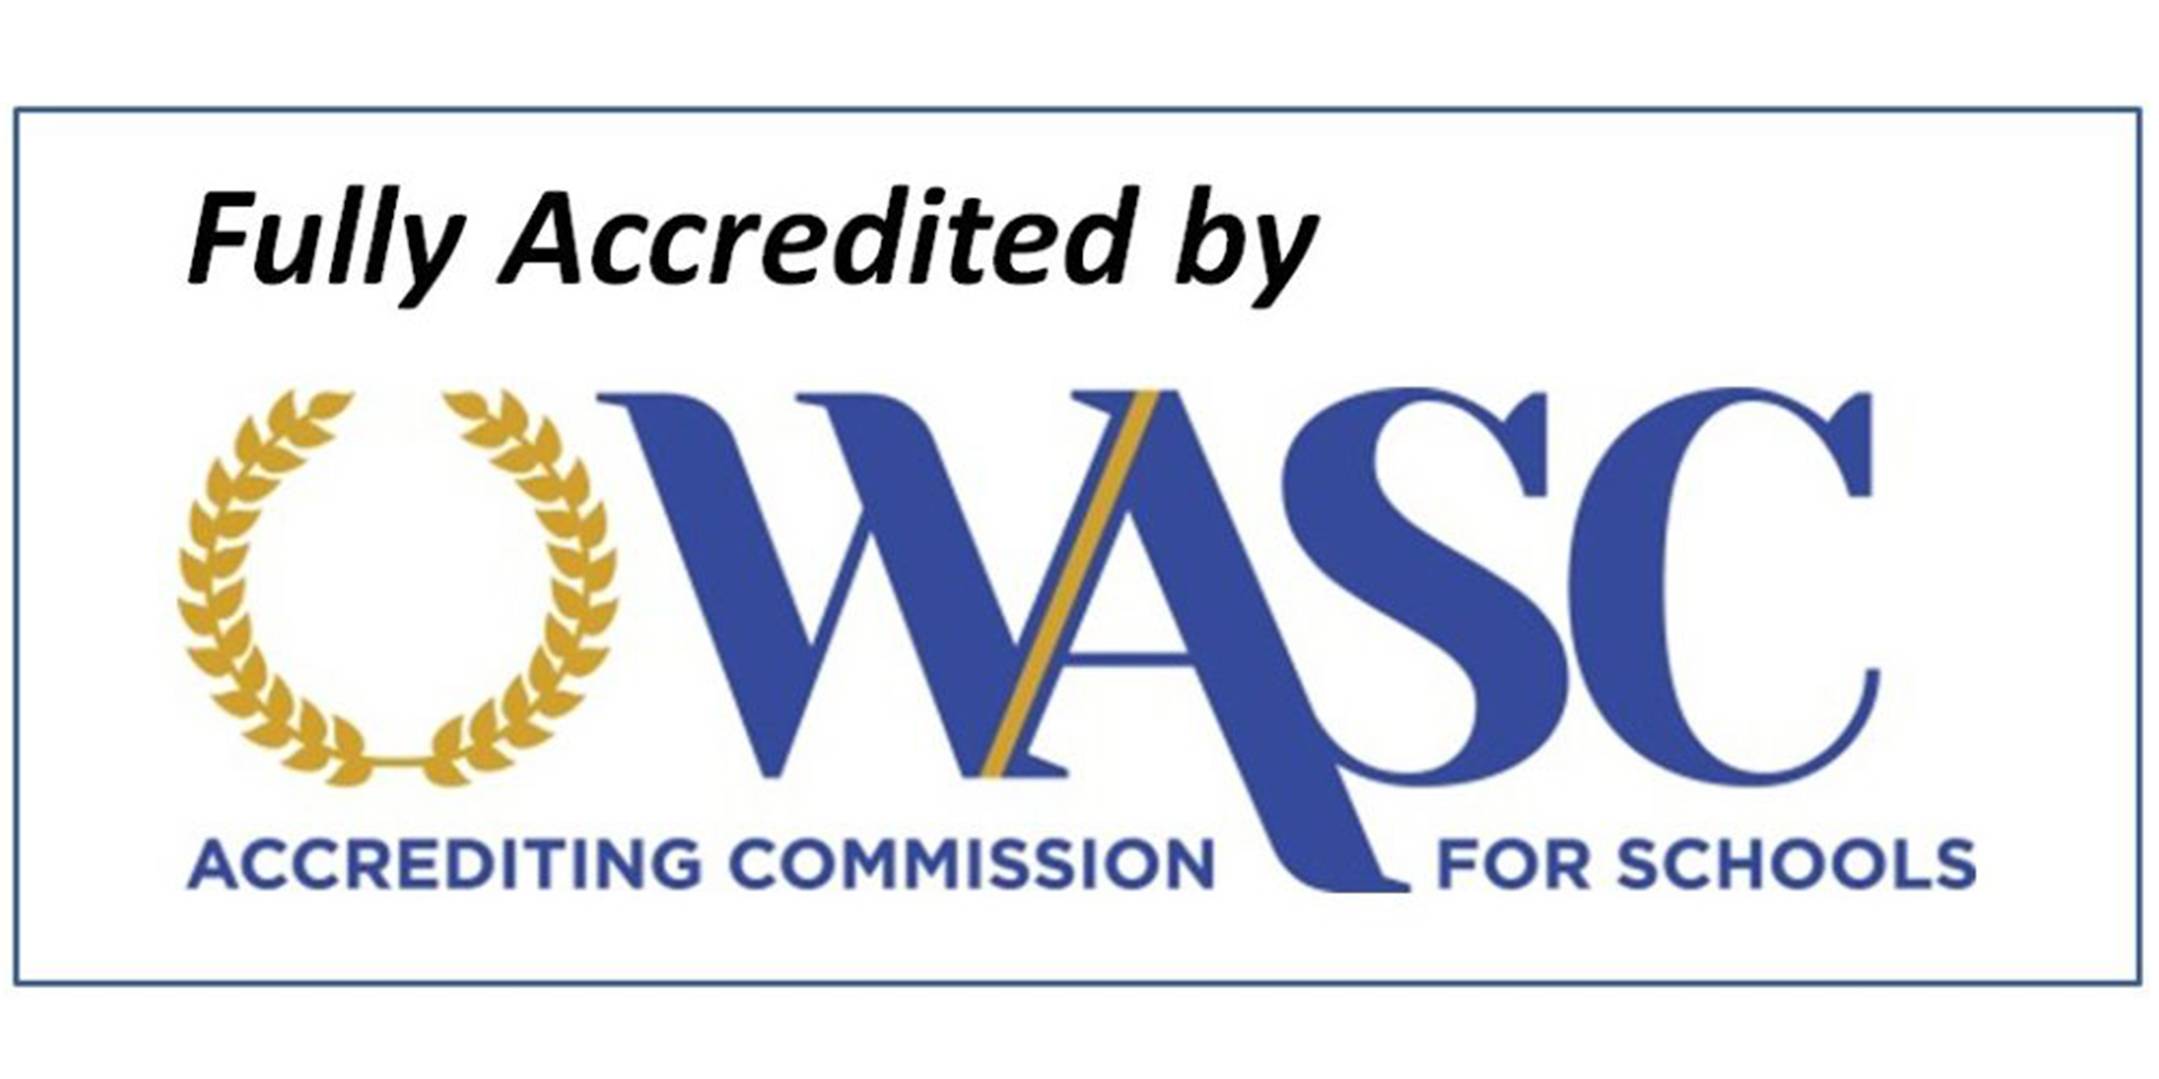 Western Association of Schools and Colleges image